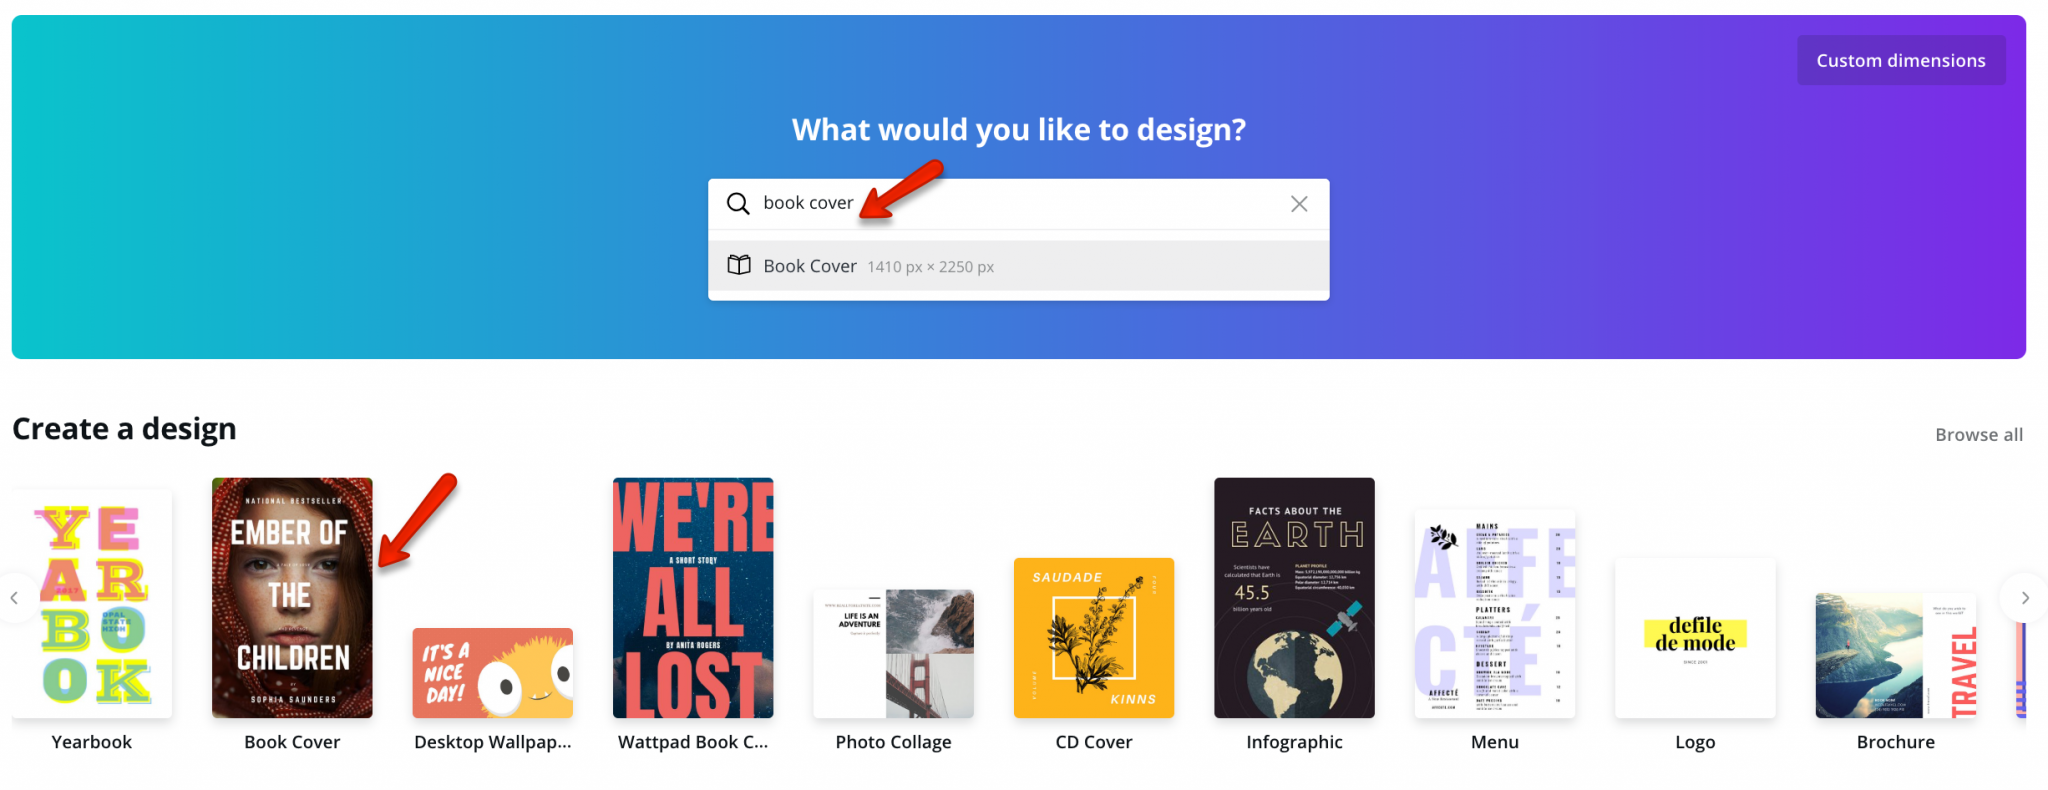 Free Book Cover Makers for Non-Designers. Thinkmaverick